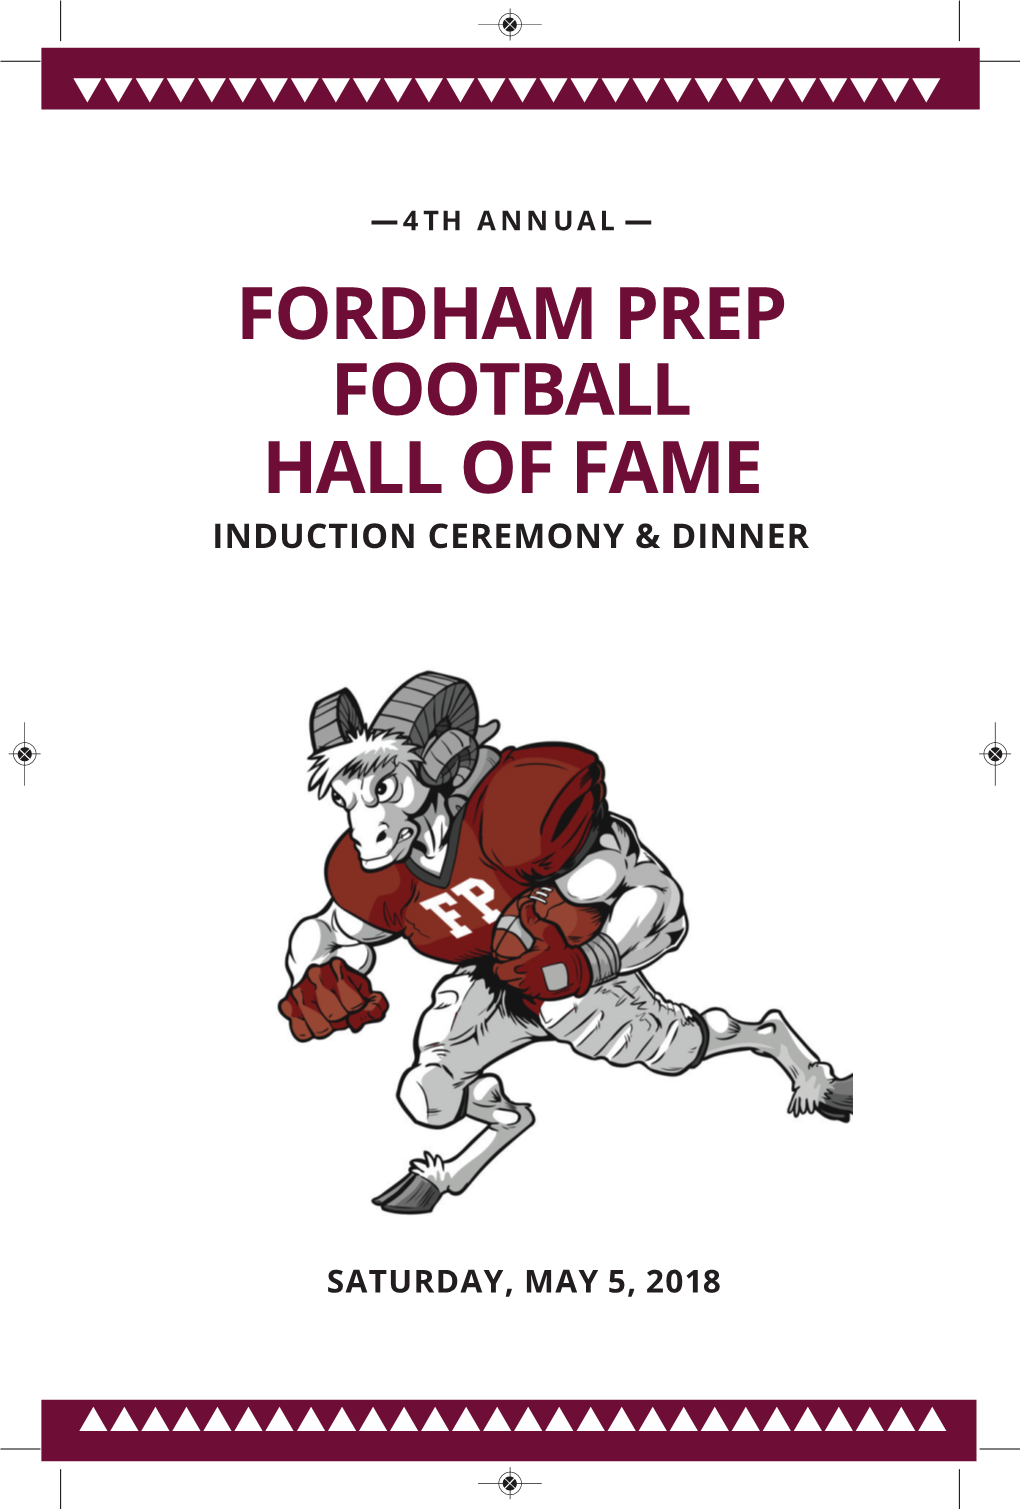 Fordham Prep Football Hall of Fame Induction Ceremony & Dinner